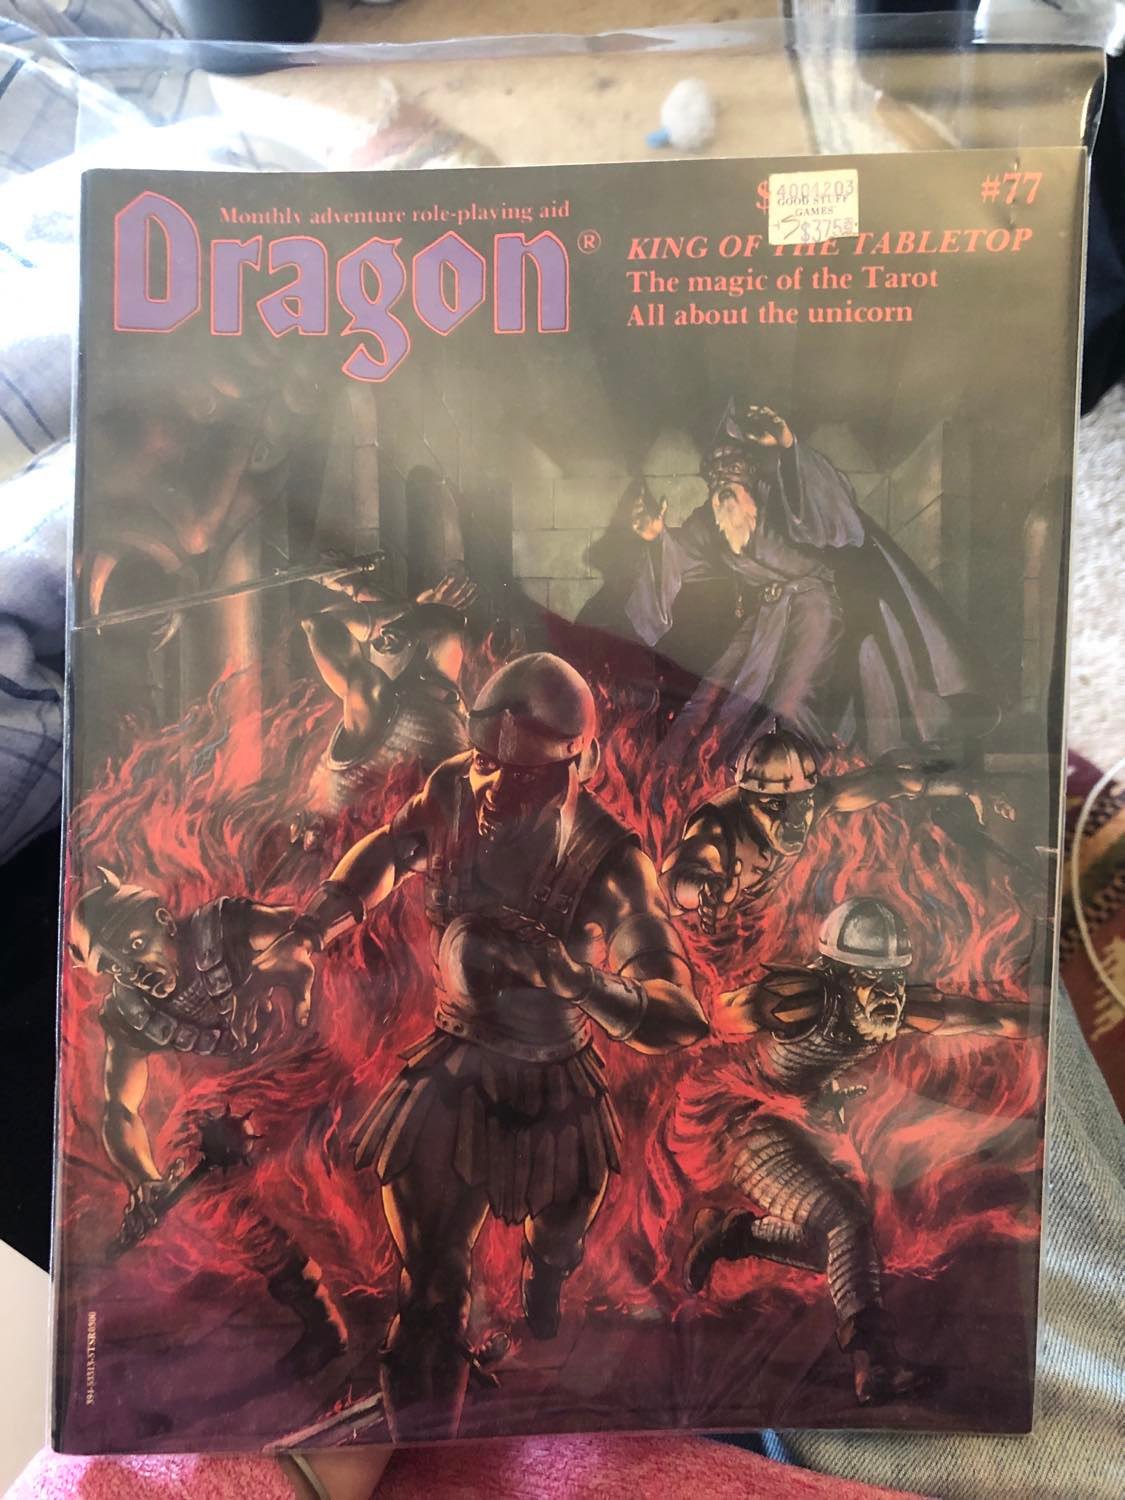 Dragon magasine issue 77, the one with the tarot of many things. It's inside of a plastic sleeve... don't expect it to stay there lol, I'm not that type, besides it's not A++ or whatever, some minor scuffing. Like it's in *ridiculously* good condition, like if this is not a reprint (I'll check it one day, no worries either way), it must have sat on a shelf in a bag its entire life. Like the pages aren't even creased open, I dunno. If this thing's original... well to be (yah let's prattle to you a bit) honest I doubt that it would get to more than a few hundred dollars, there are lots of copies of it, and I paid thirty dollars for it this year in 2022. D and d is getting really big these days, so it could become more valuable, you never know. There's no text saying it's a reprint, and it appears that there's so many available right now, how obscure this presently is (there are very few articles or even forum posts talking about it), but it might take off. Still, I don't expect to keep it in that plastic sleeve, it's got some minor minor scuffs, like A+ but not A++ type of thing. Firm cardstock paper all around, a solid magasine. I plan to keep it open in my d and d box personally, let it get scuffed and scratched a bit, get lived in a little. Nah, I'm not a keep it in the box kinda person, I've gotta play with it. 200 dollars to... well like I said, it's not A+++ material, so if they ever get to five grand... not that I'd want to sell it regardless, I dunno a mill, but this ain't Superman number 1, three million copies, let's let this thing live a little bit. You've got a minor scuff, I'll give you a few more. I mean it's got insect comics (see pic three), I've *gotta* play with it. If you're unfamiliar with the insect note, see my fly chronicles page, I've befriended them. Anyways yes, the cover of dragon magasine 77, with the price tag on the cover still, 3.75 from good stuff games. OOhh, you got a minute, I'll lay it out here. Dragon, King of the tabletop. The magic of the tarot. all about the unicorn. monthly adventure role-playing aid. 77 is at the top right. A wizard at the back of a stone chamber, archways and pilars all around, a giant fanged stone head on the left. He looms behind a gathering of soldiers, all engulfed in fire, running away in fear and confusion. It's very atmospheric, the pale green light of the back of the chamber. Yah those soldiers should have had a cleric with them, or... I dunno, they seem woefully unprepared to take on a wizard, I don't know what they were thinking. Like... miles away, they should have seen this coming, I dunno what the story is behind this lol. They should really have a cleric with them, these are all fighters, c'mon guys. Some have beards, that fang face is glowing kinda cool. Yah guys, come back with a cleric, or if the wizard is the good guy well then... wow, easy win. Anyways, it looks cool.